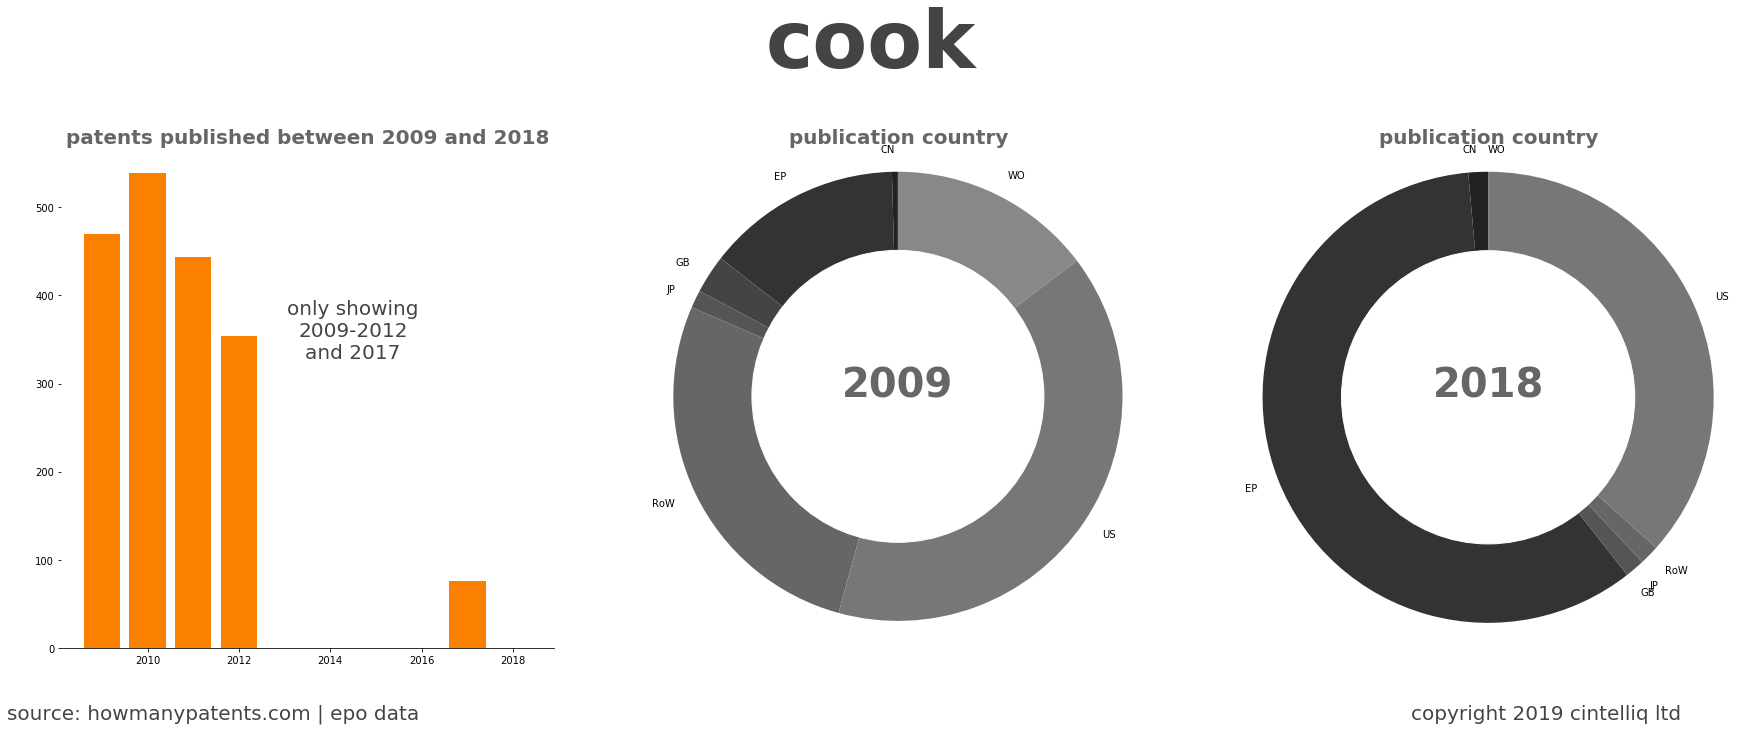 summary of patents for Cook